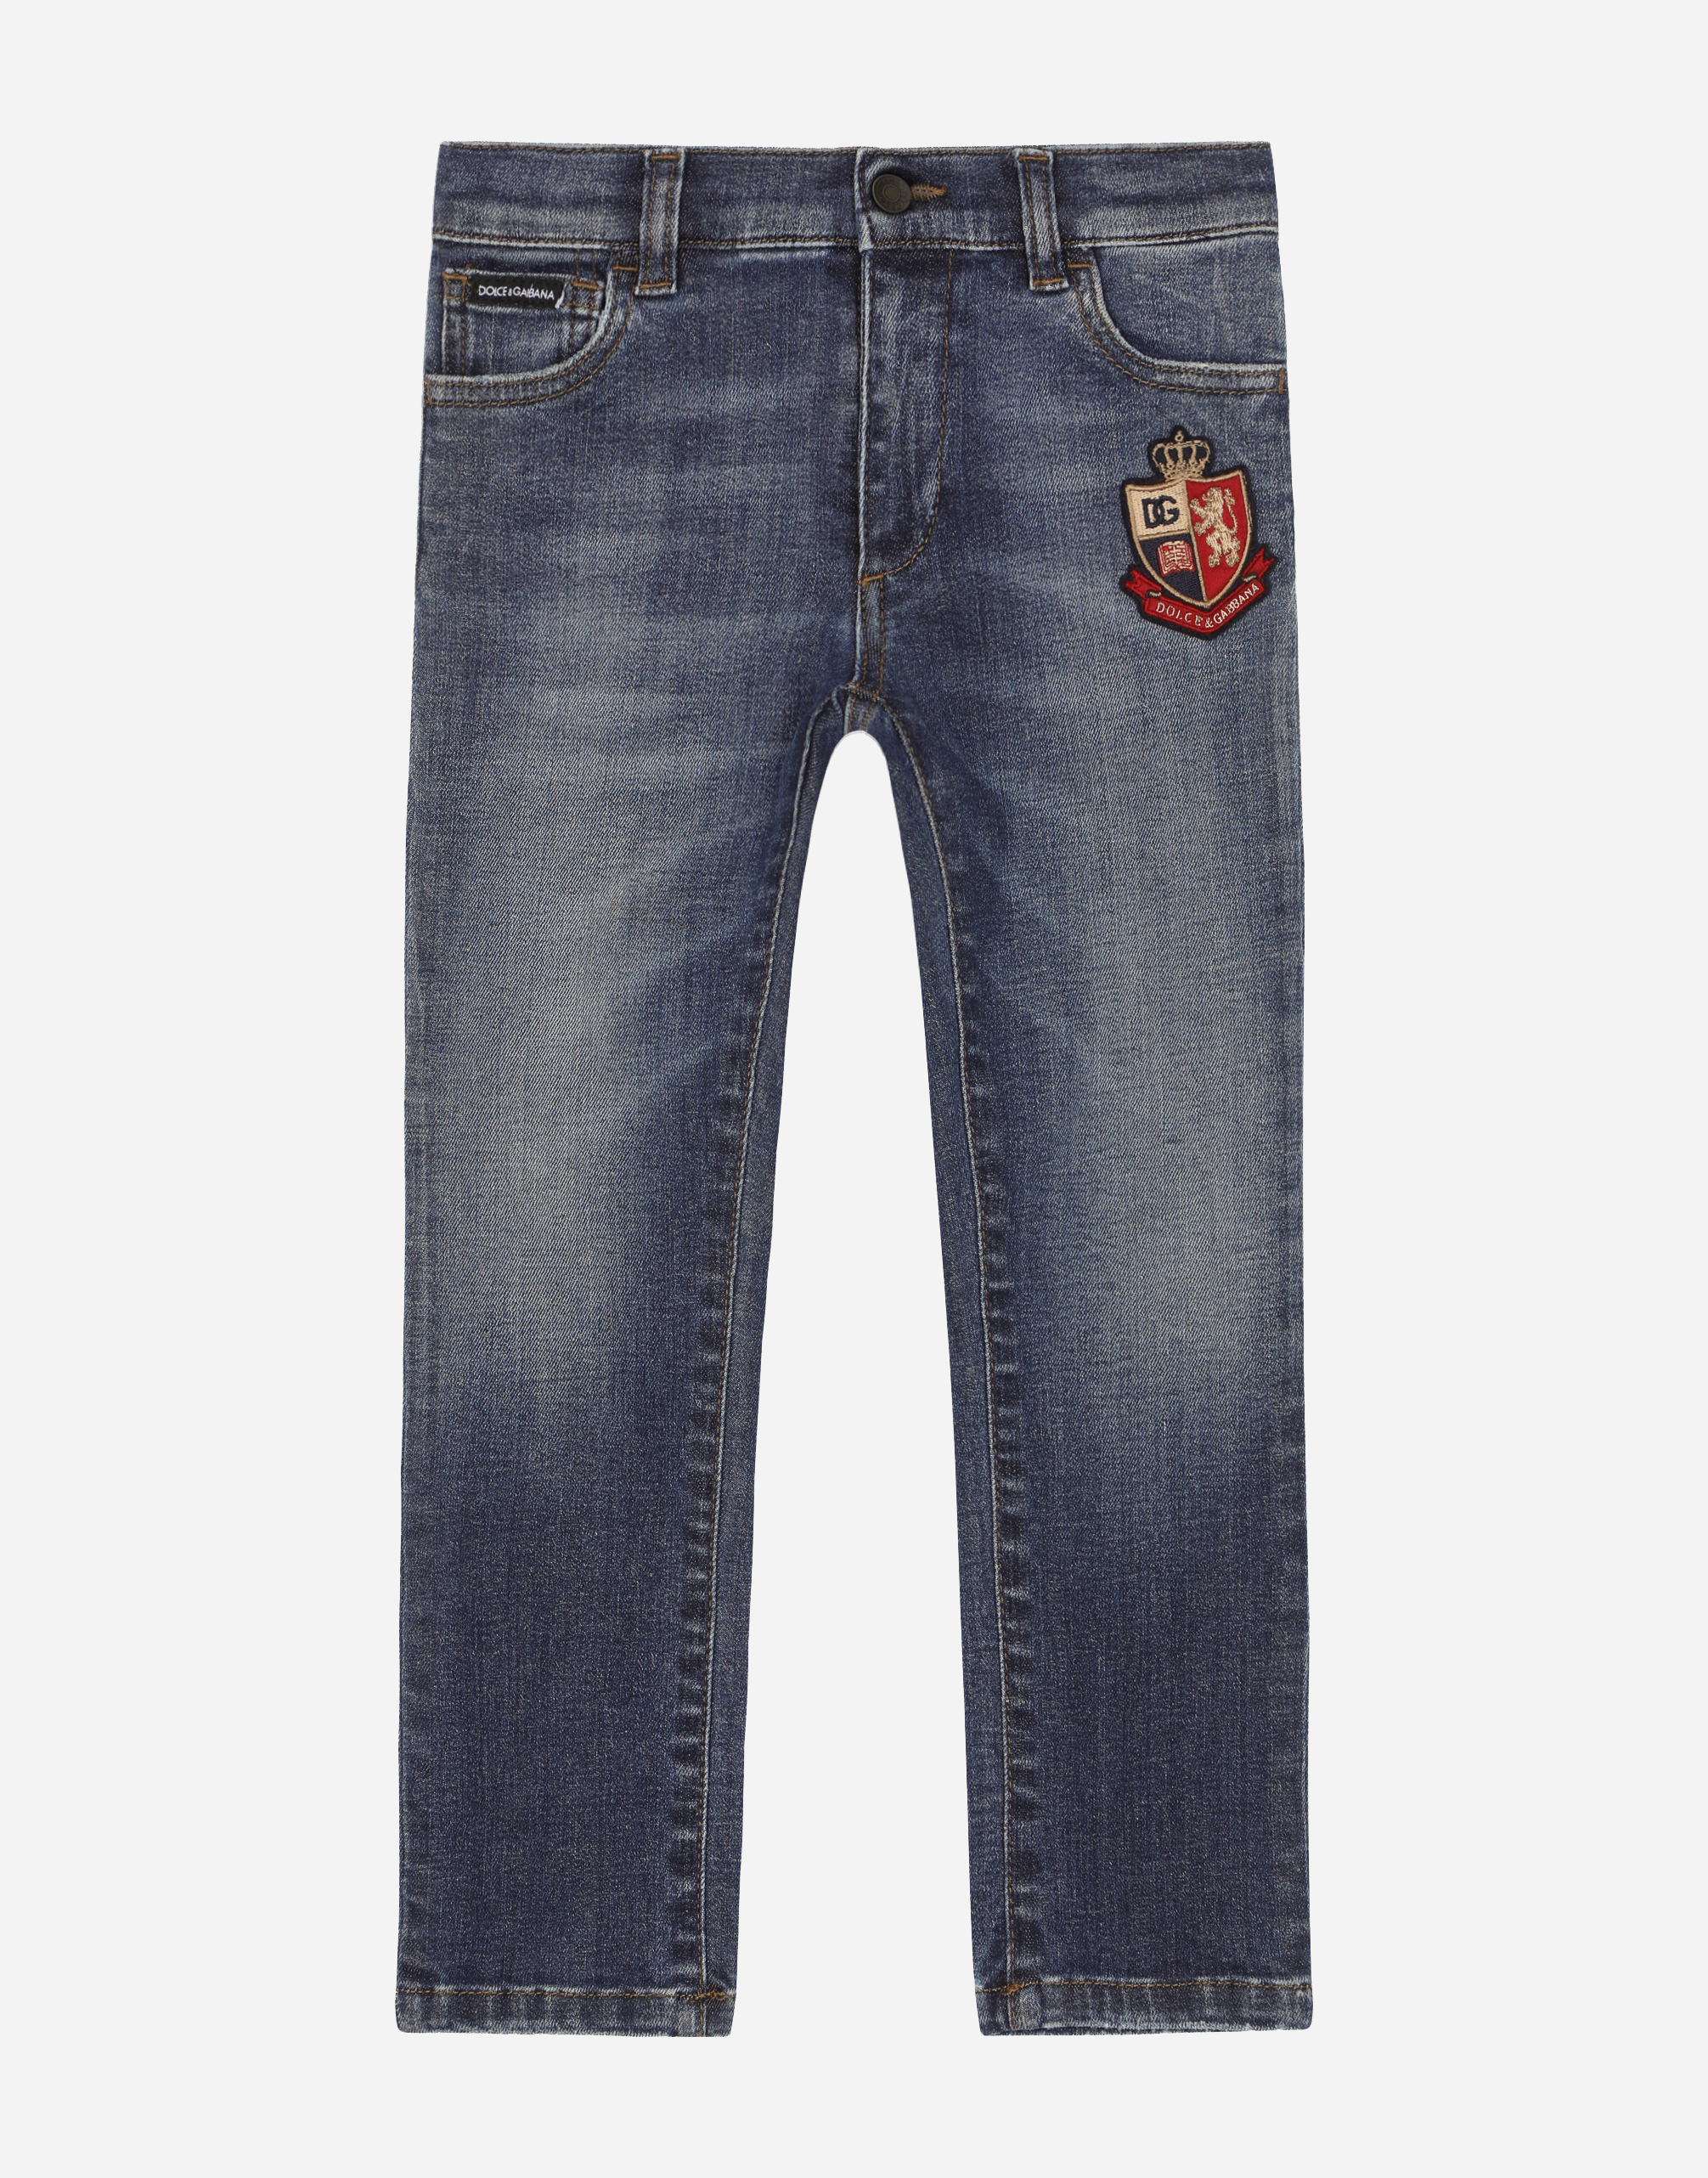 Slim-fit blue wash jeans with heraldic patch in Multicolor